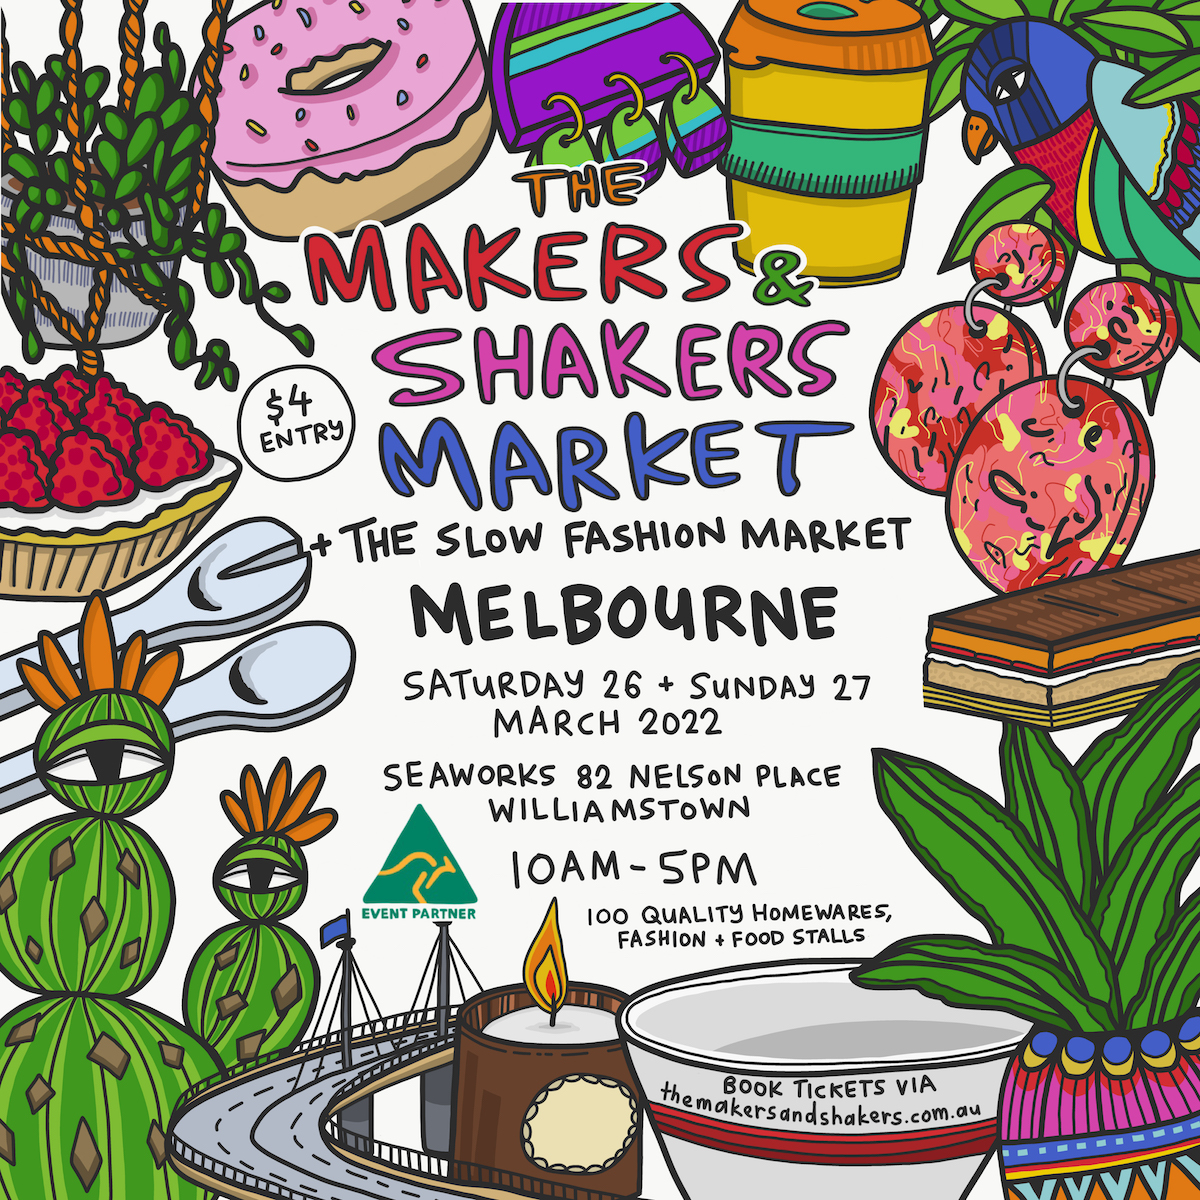 Presents Makers and Shakers Market